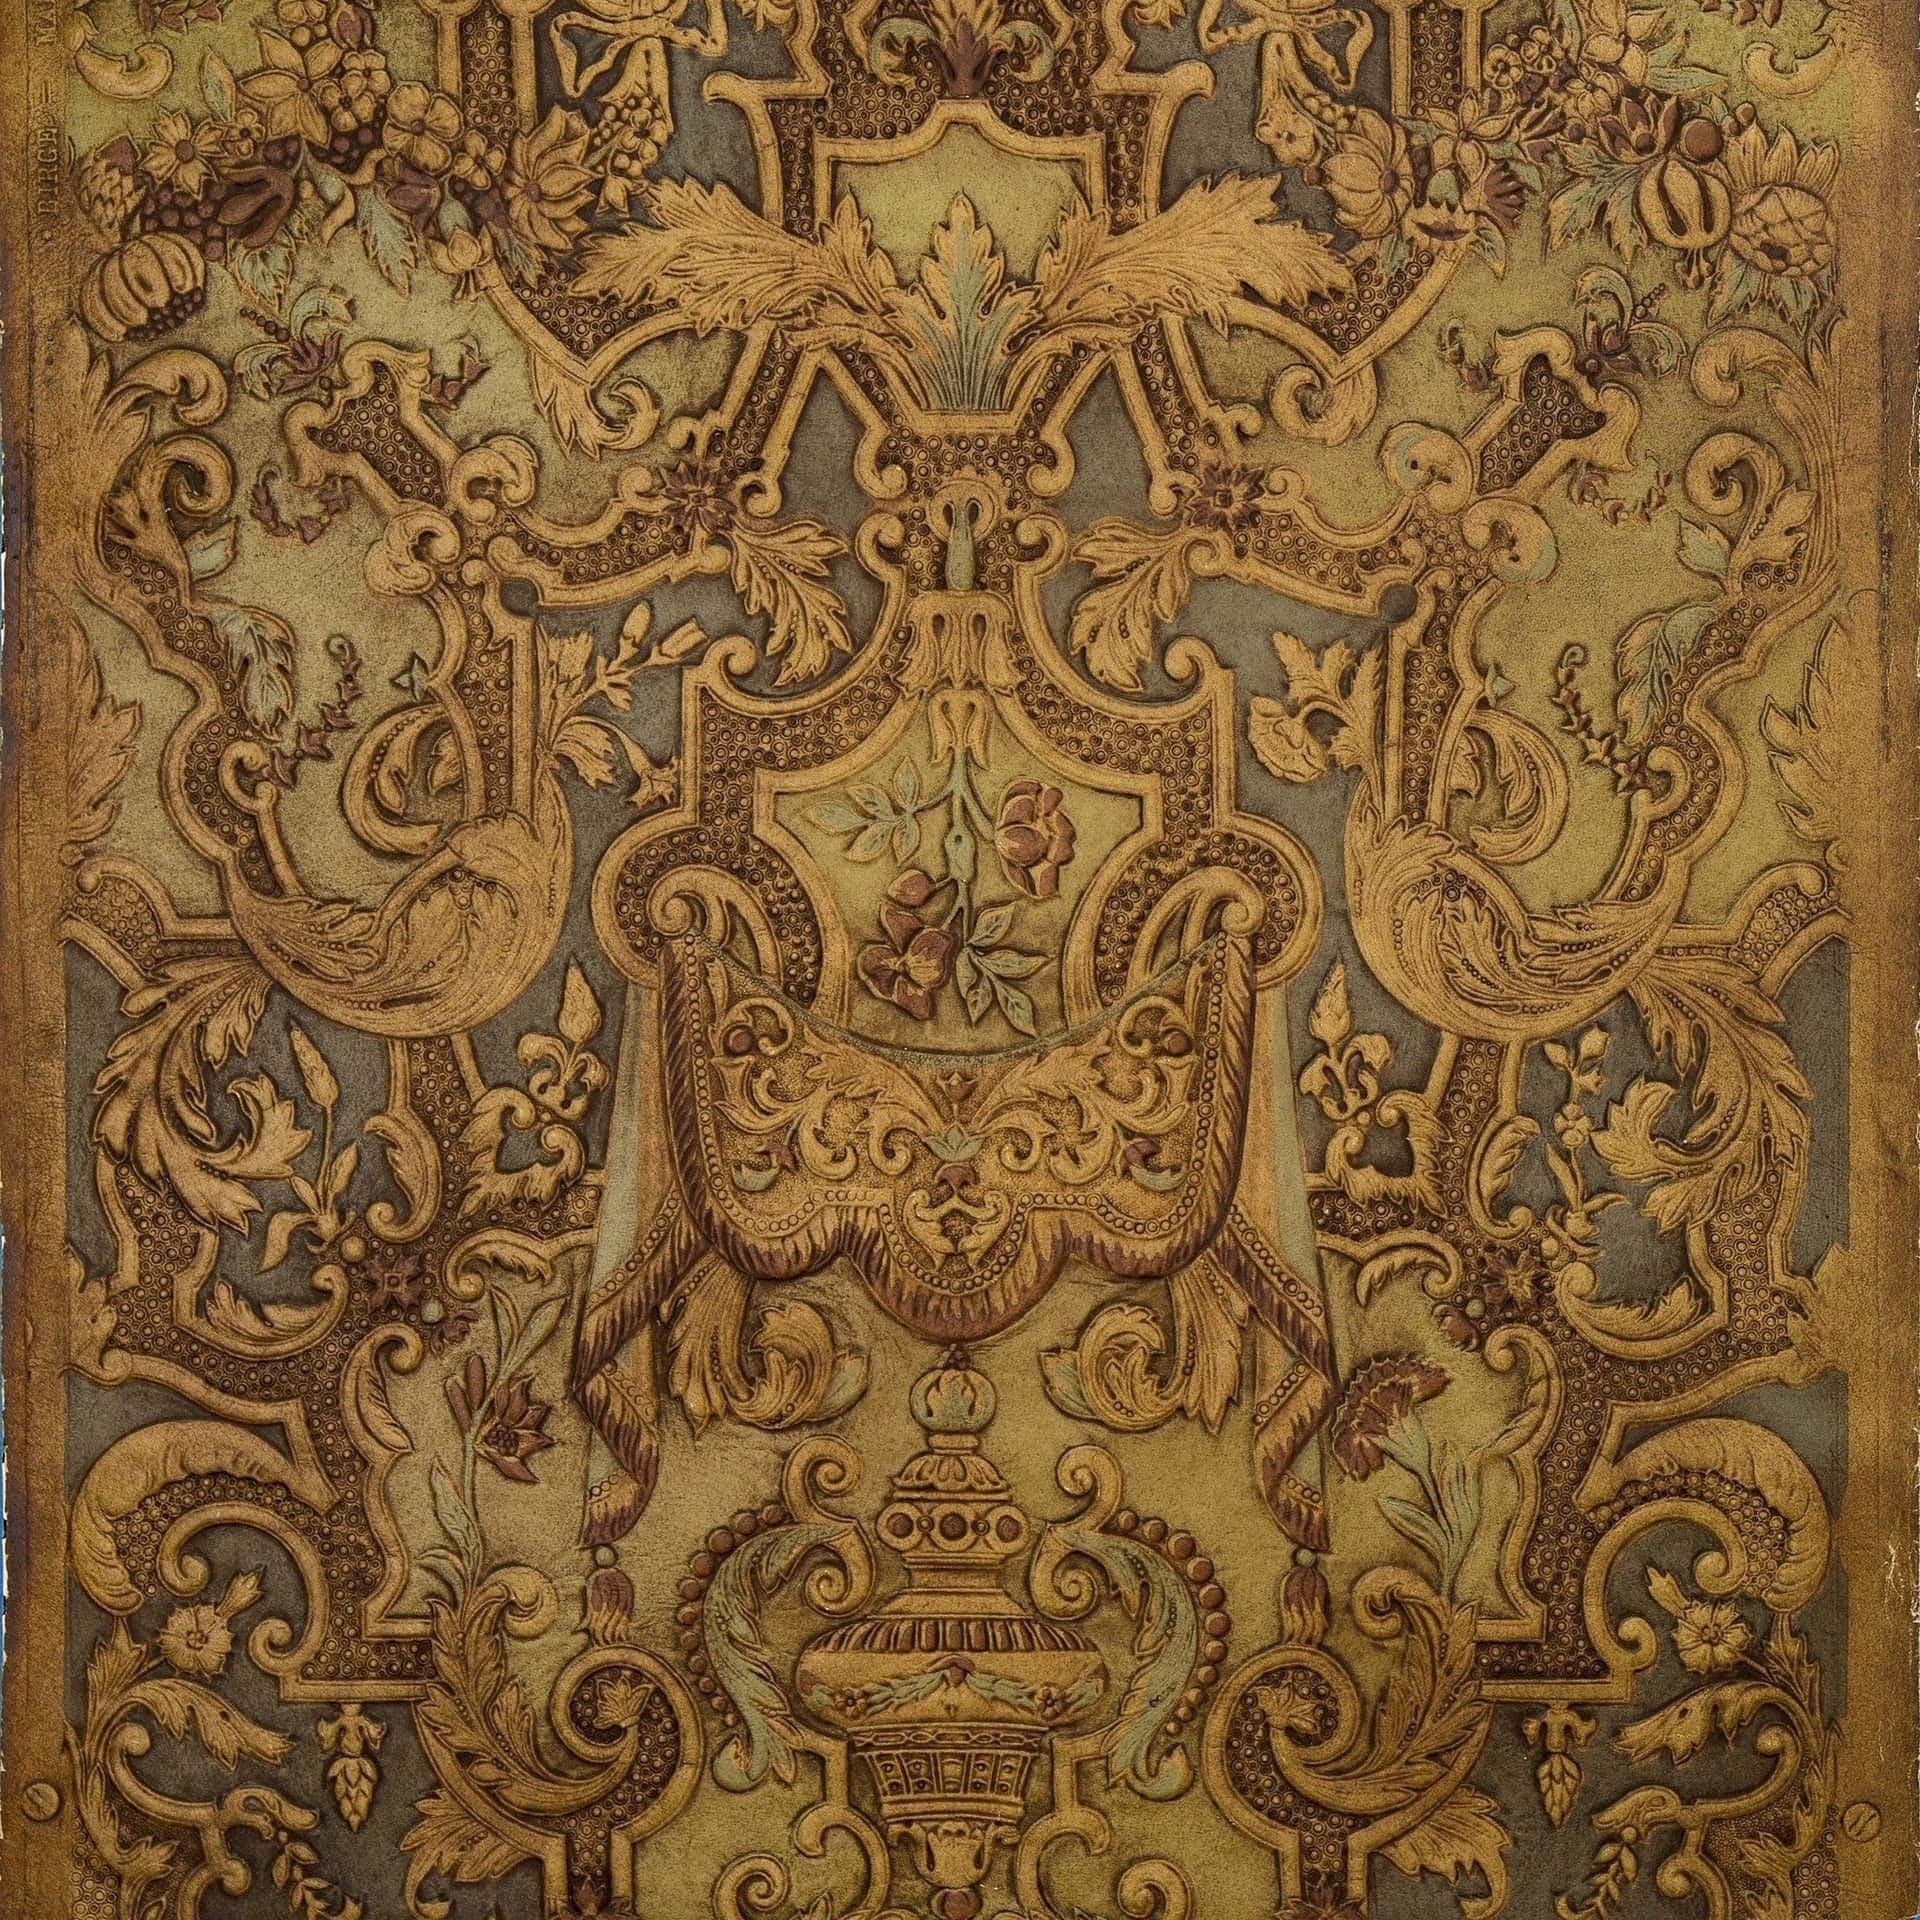 A Brown And Gold Tapestry With Ornate Designs Wallpaper